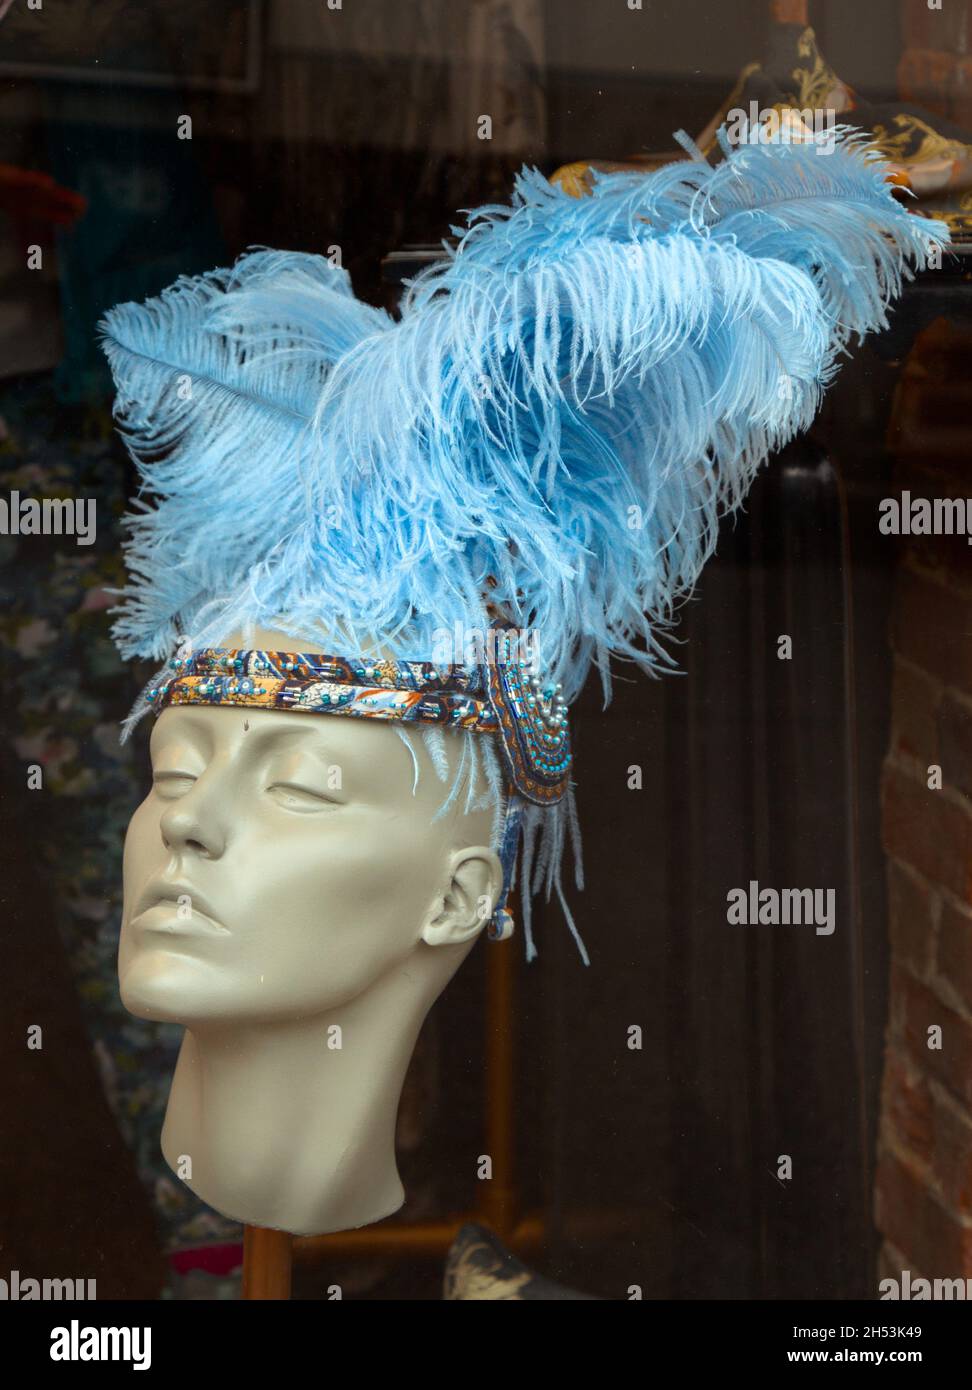 Blue Feather Headress On A Green Mannequin Head In The Window Of A Milliner's Shop, Lymington UK Stock Photo